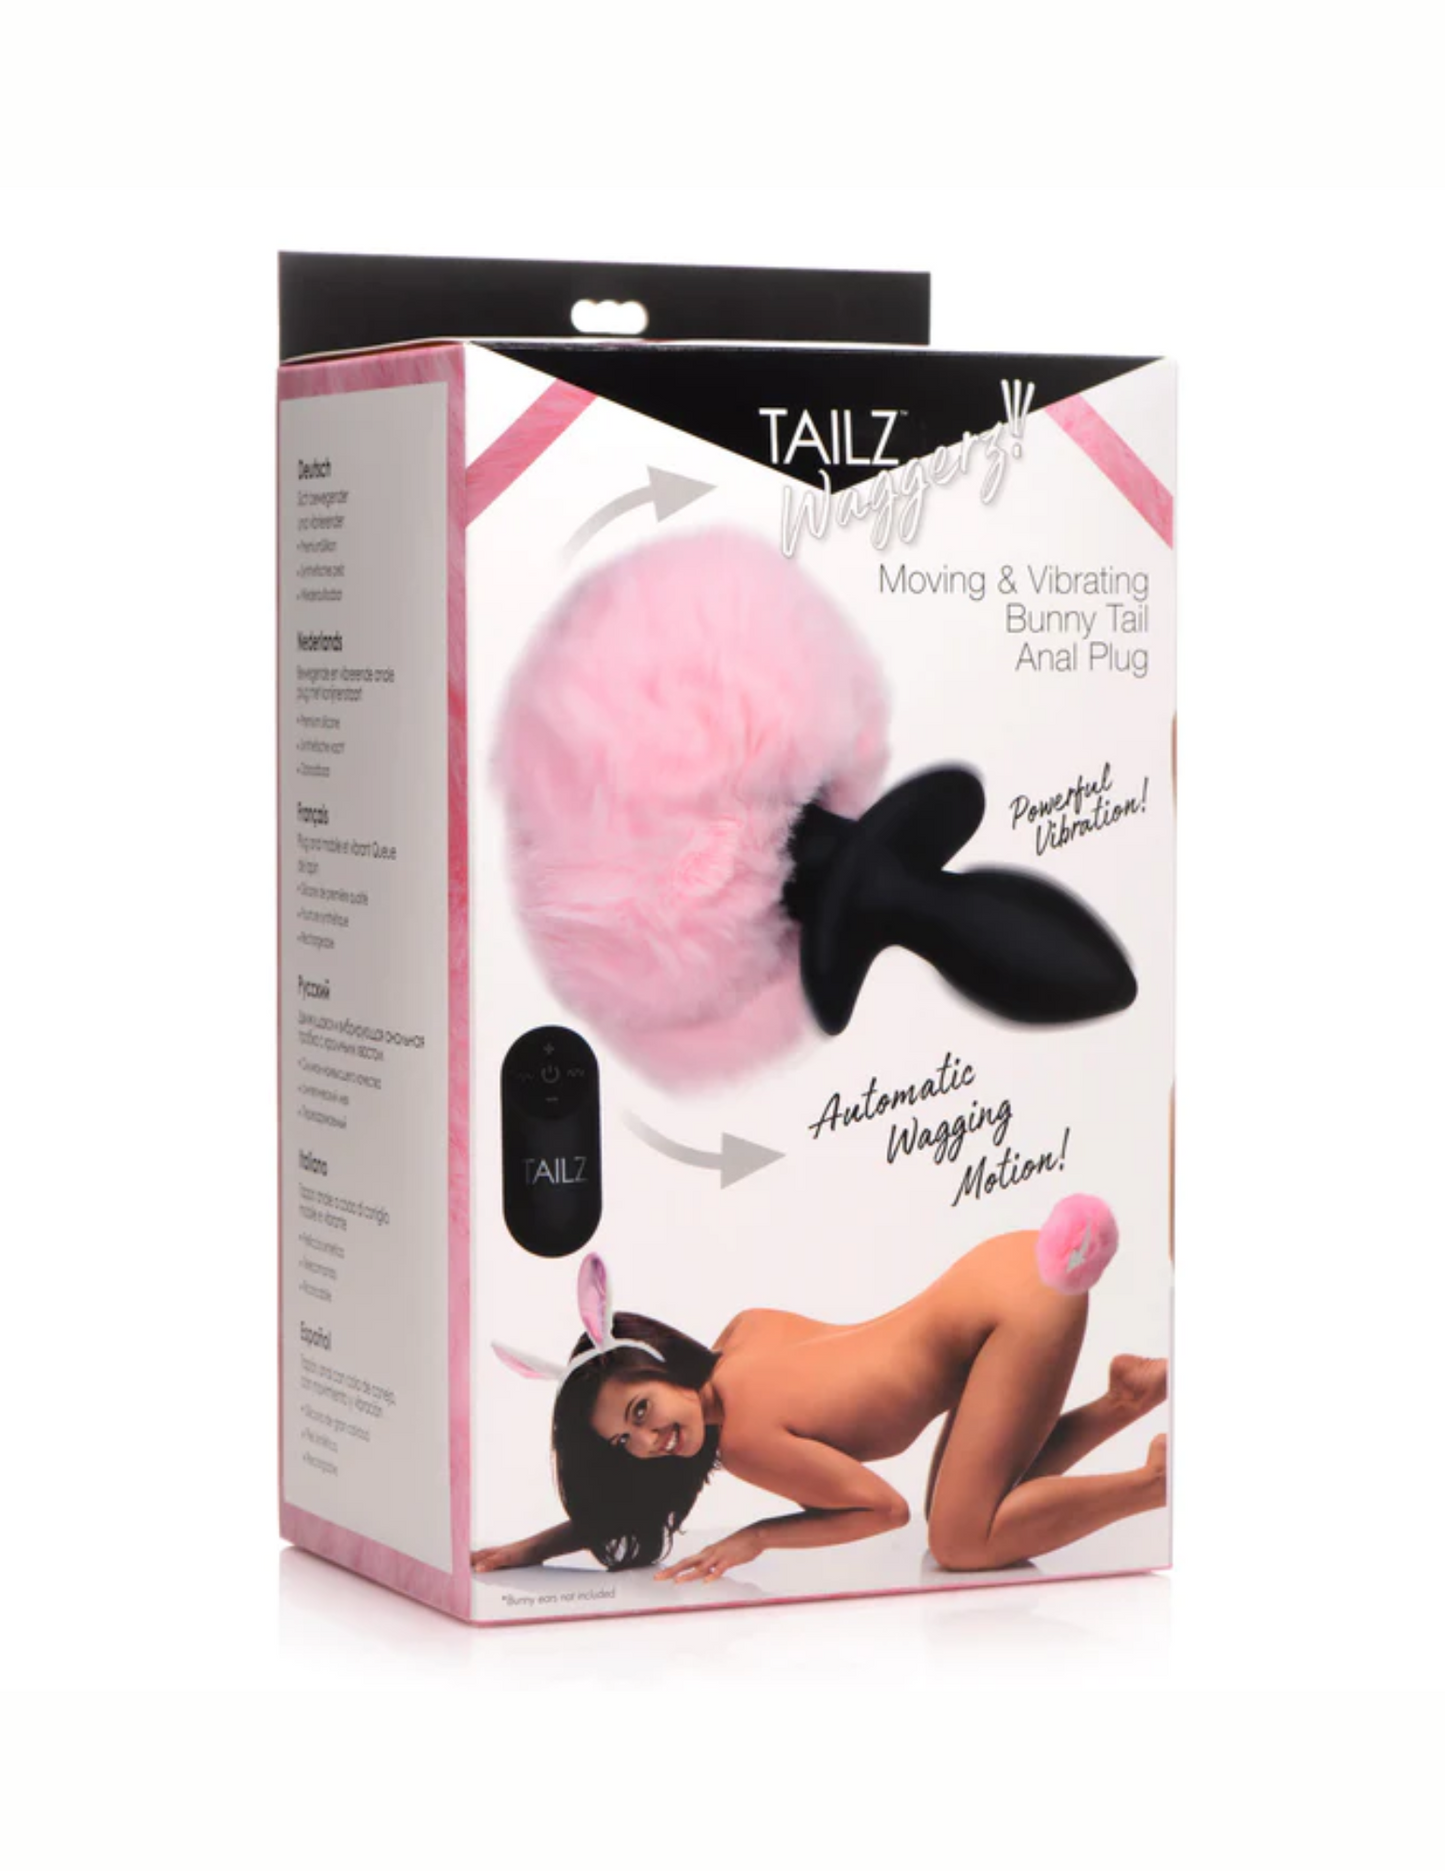 Tailz Waggerz Moving and Vibrating Bunny Tail Anal Plug (pink) in package.